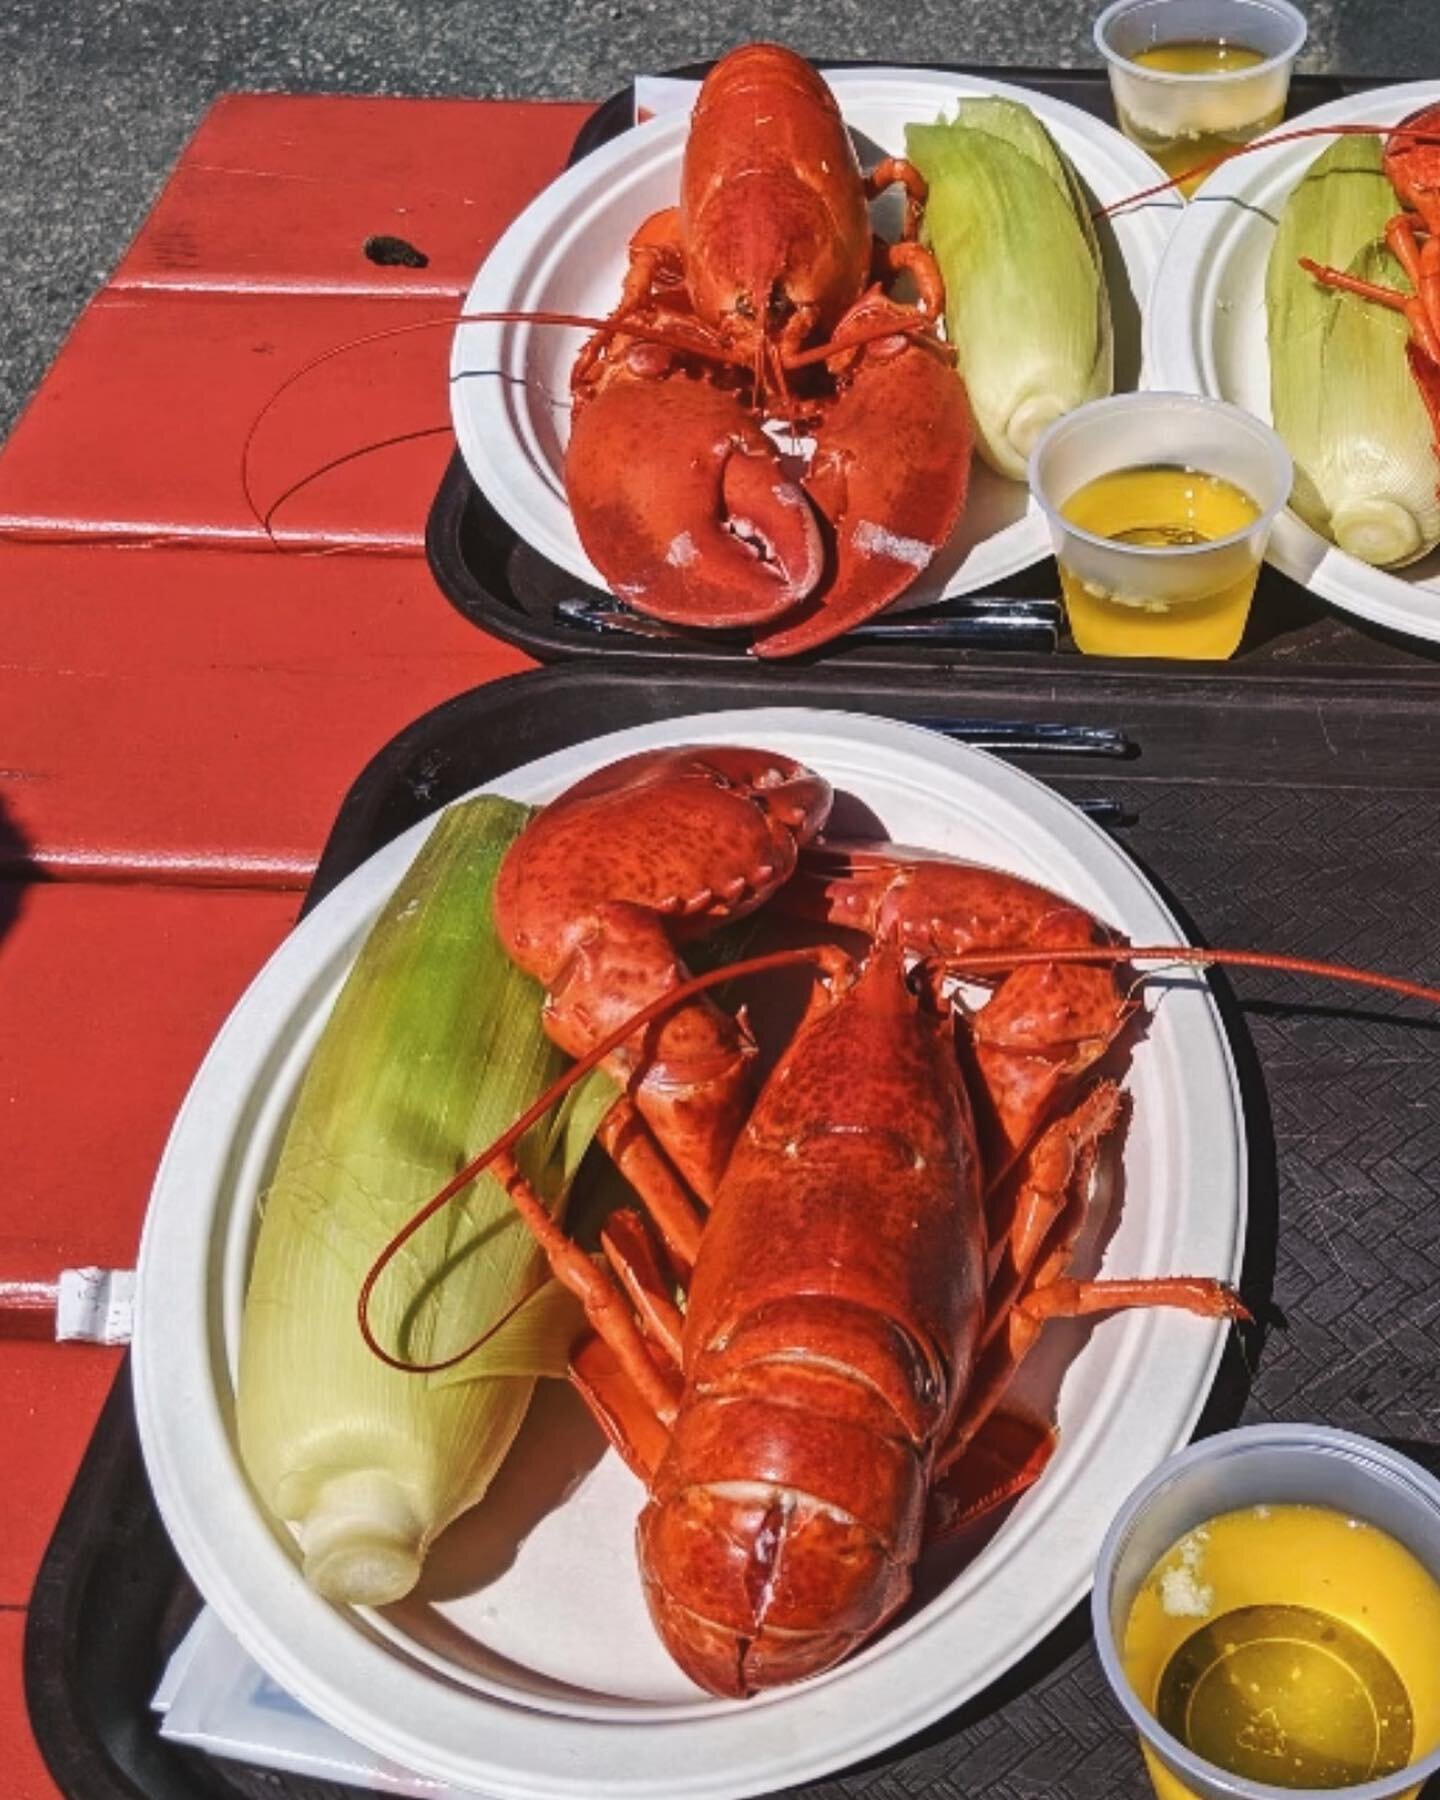 ❗️🦞WEEKEND LOBSTER SPECIAL🦞❗️1lb lobster paired with steaming clam chowder, corn on the cob &amp; coleslaw for $19.99. Yup, $19.99.
The nights may be getting chilly, but things are still hot down at the Rough! Fire pits will be blazing and the heat